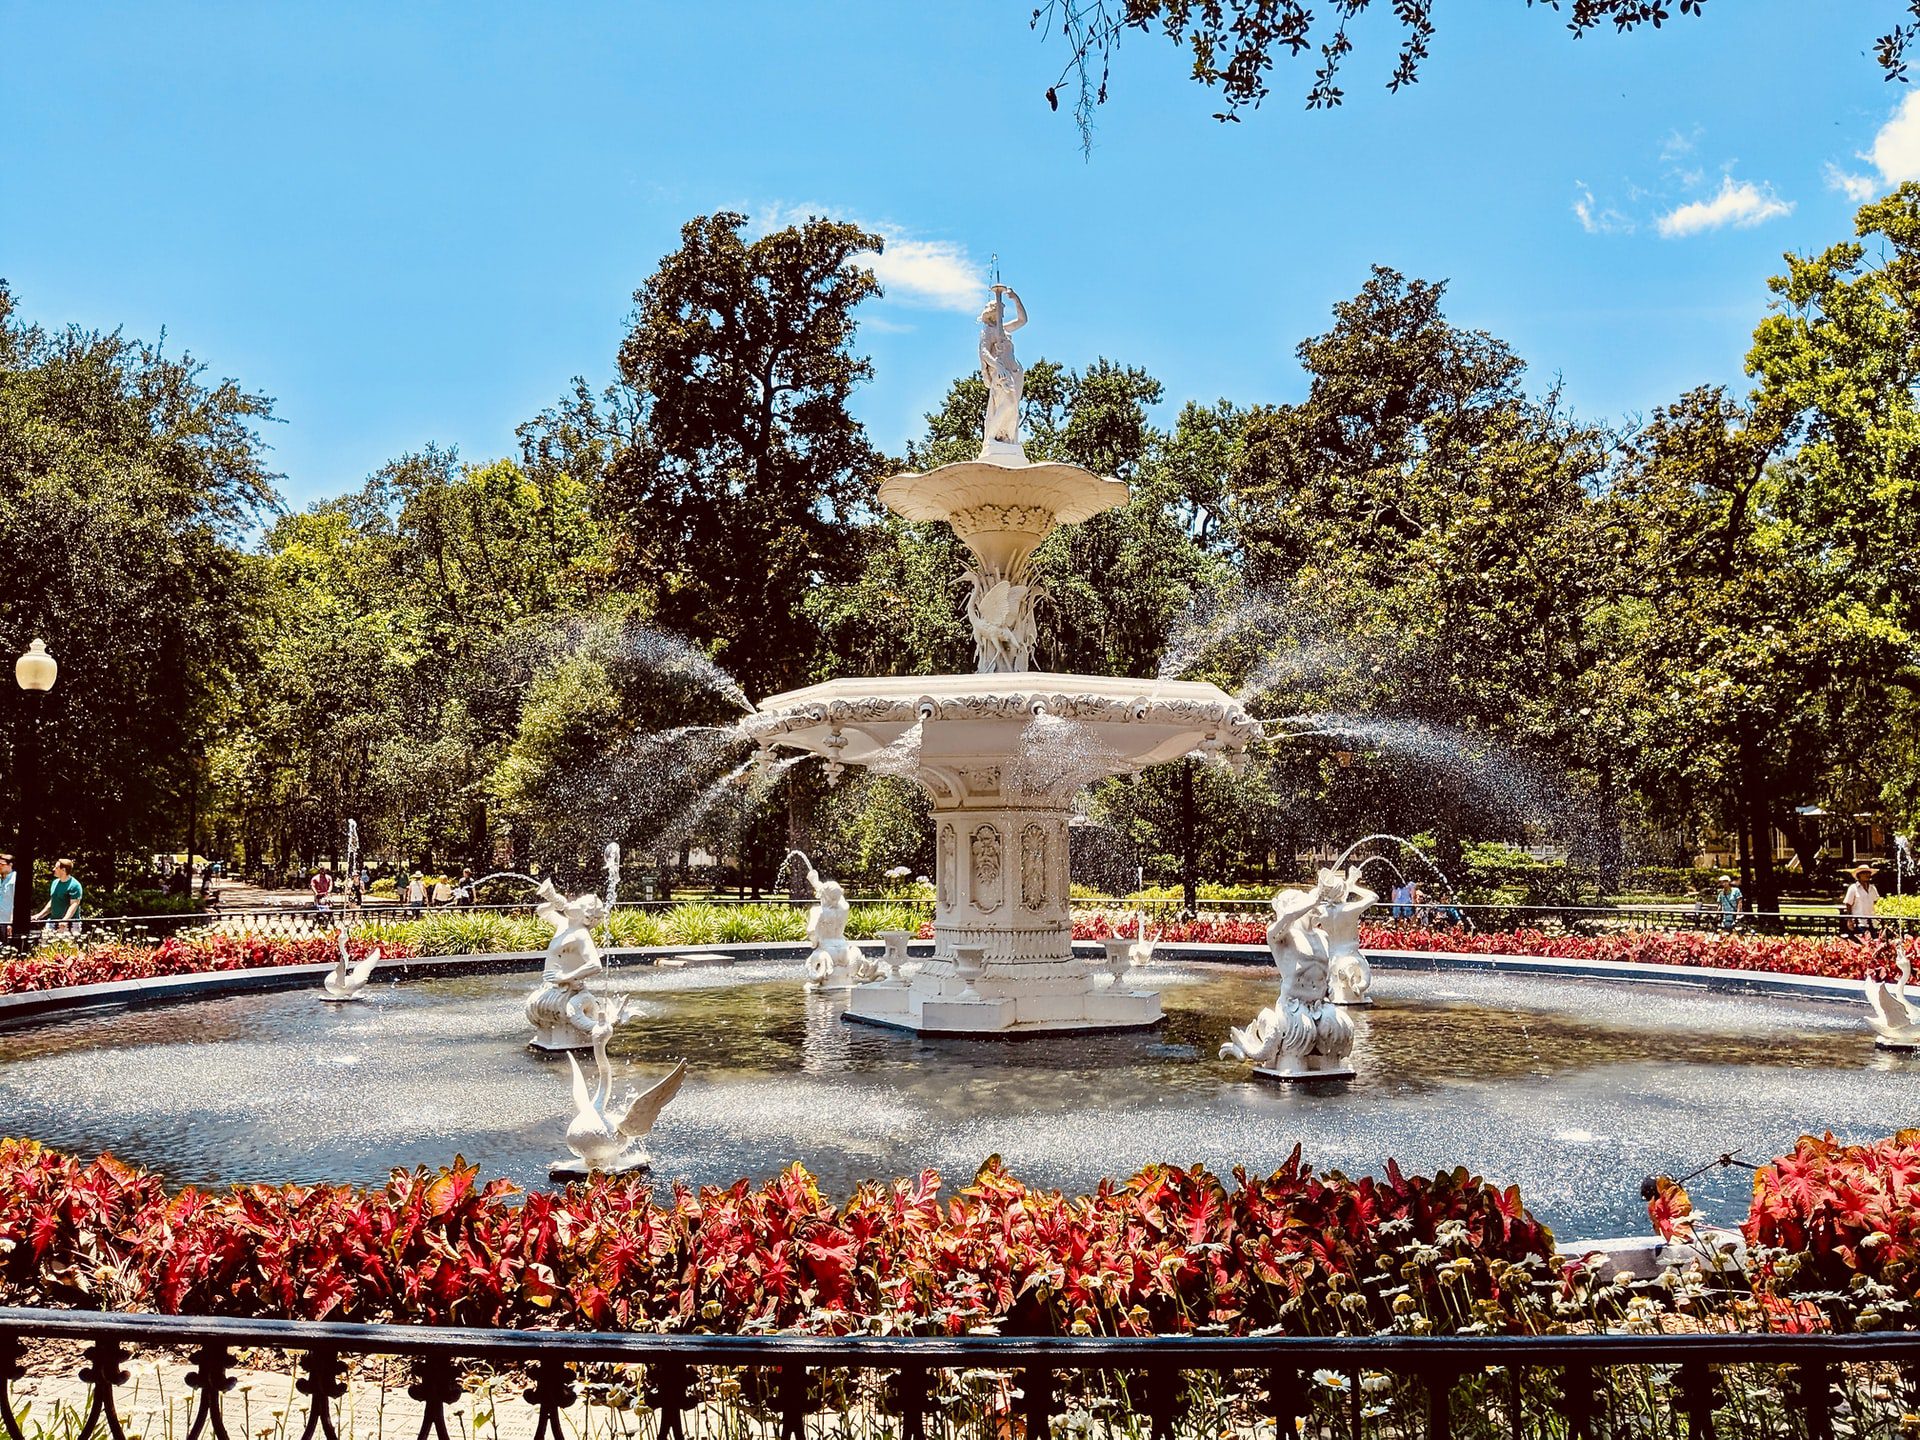 The famous fountain in Forsyth Park, surrounded by an iron gate and oak trees.